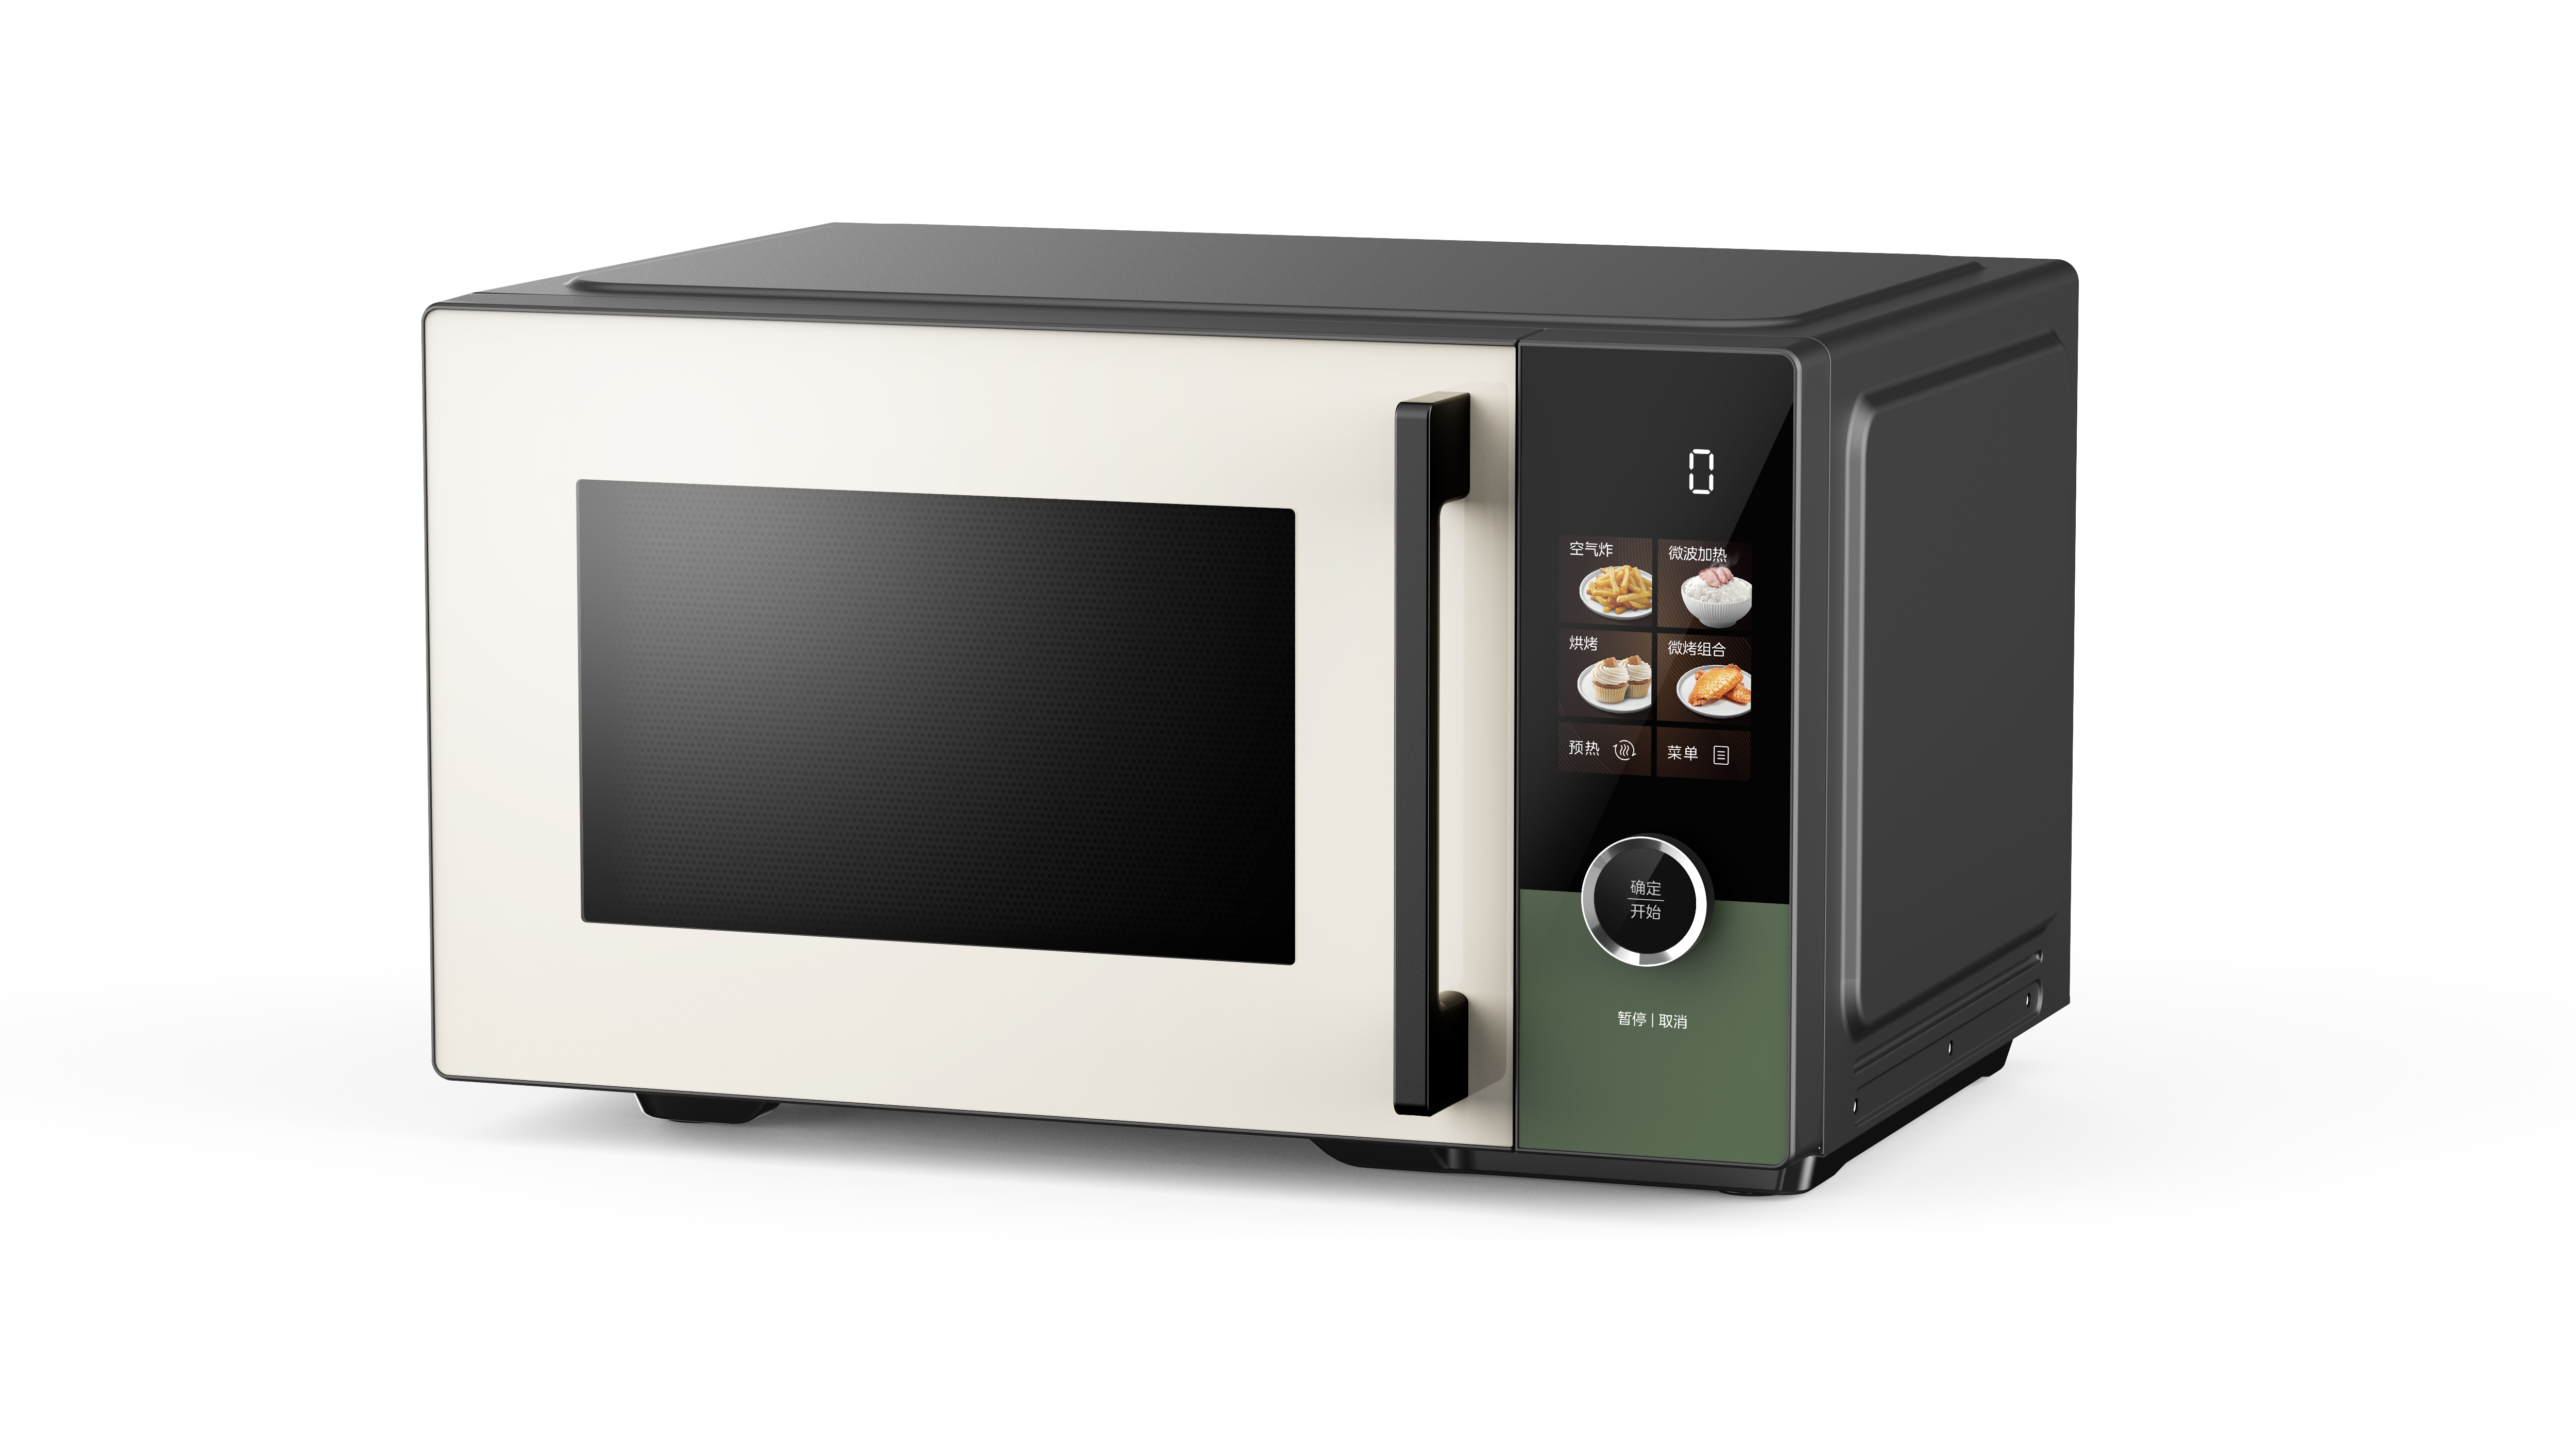 The Artist Microwave Oven